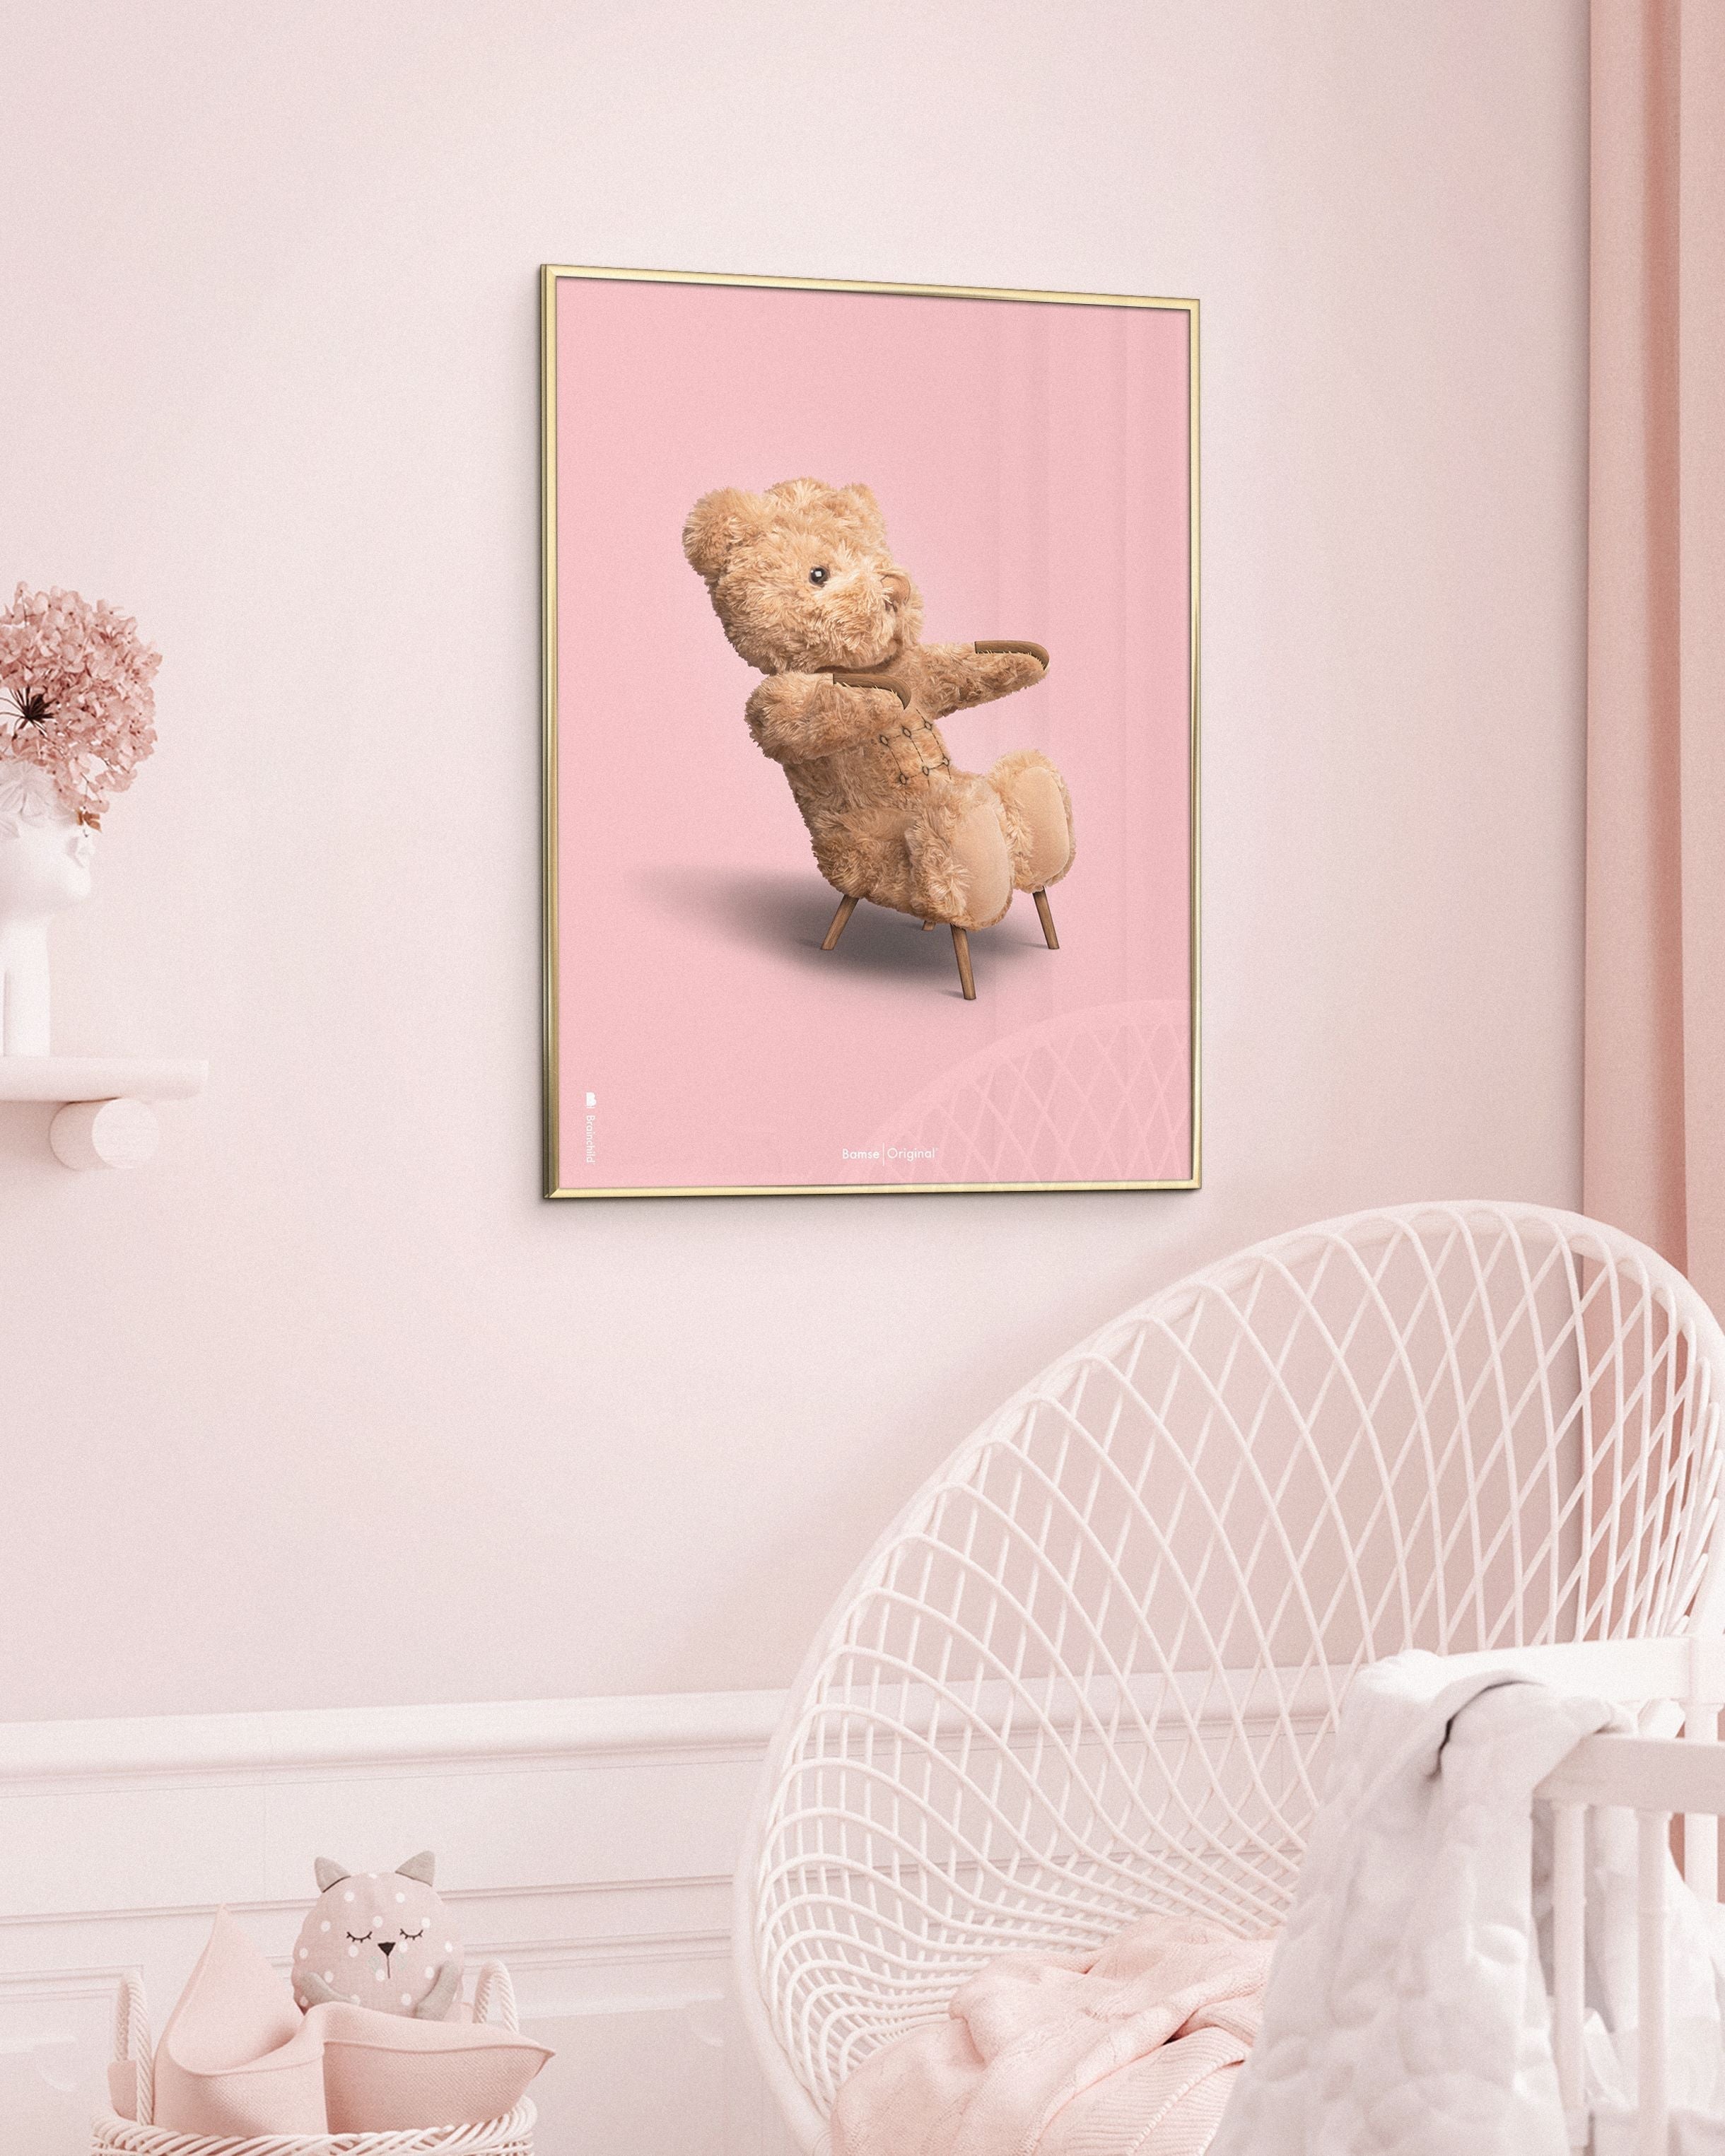 Brainchild Teddy Bear Classic Poster Frame Made Of Black Lacquered Wood 50x70 Cm, Pink Background